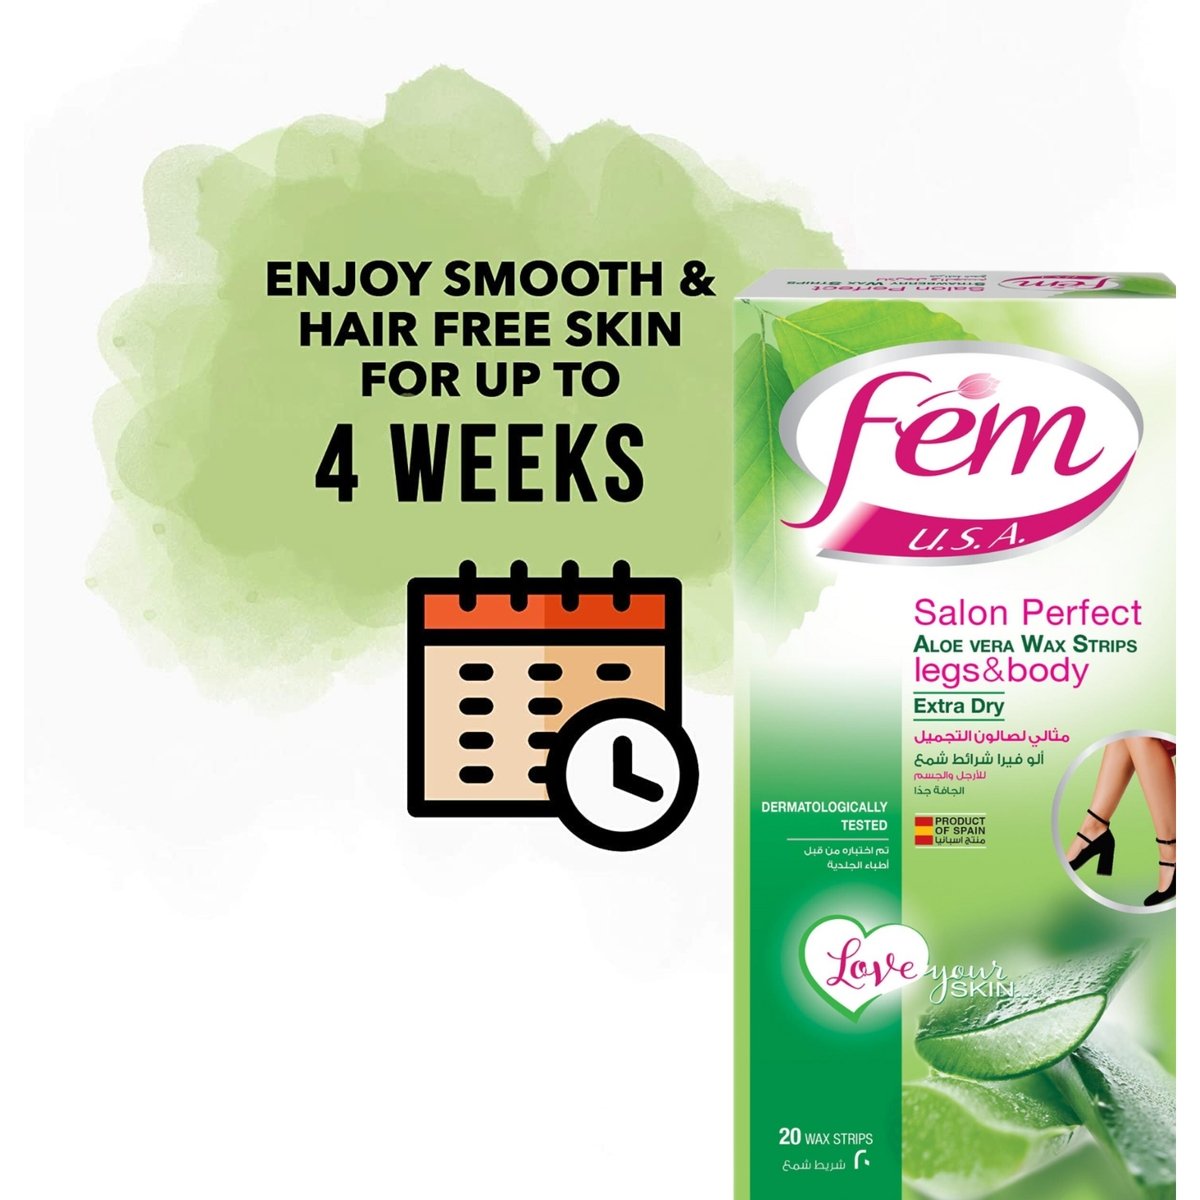 Fem USA Legs & Body Wax Strips Extra Dry Enriched With Aloe Vera 20 pcs